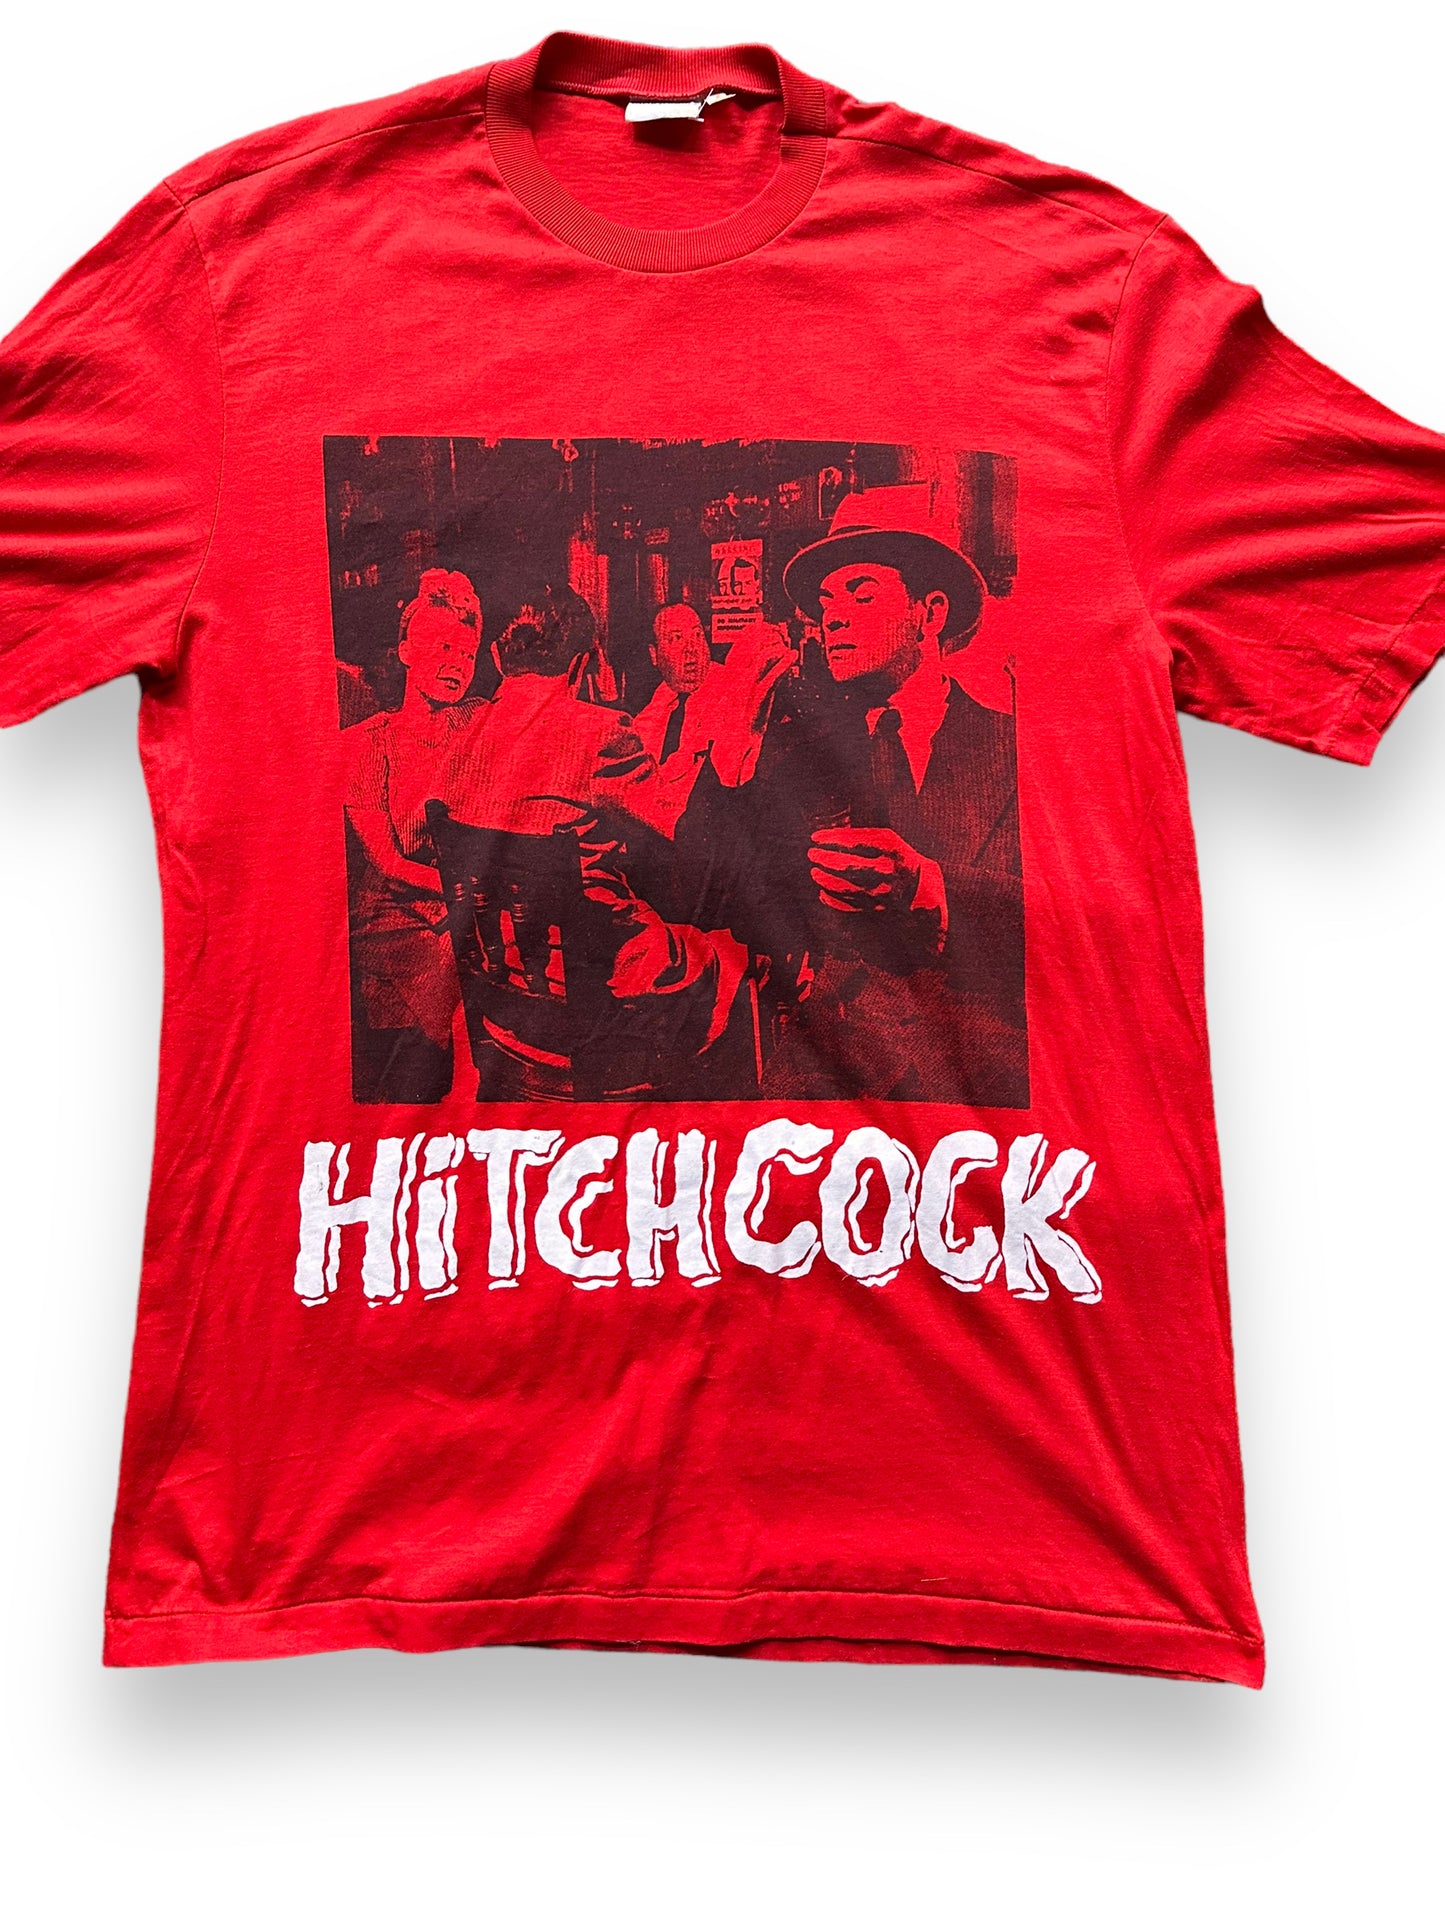 Front Detail on Vintage Alfred Hitchcock Tee SZ L | Vintage Hitchock T-Shirt Seattle | Barn Owl Vintage Tees Seattle